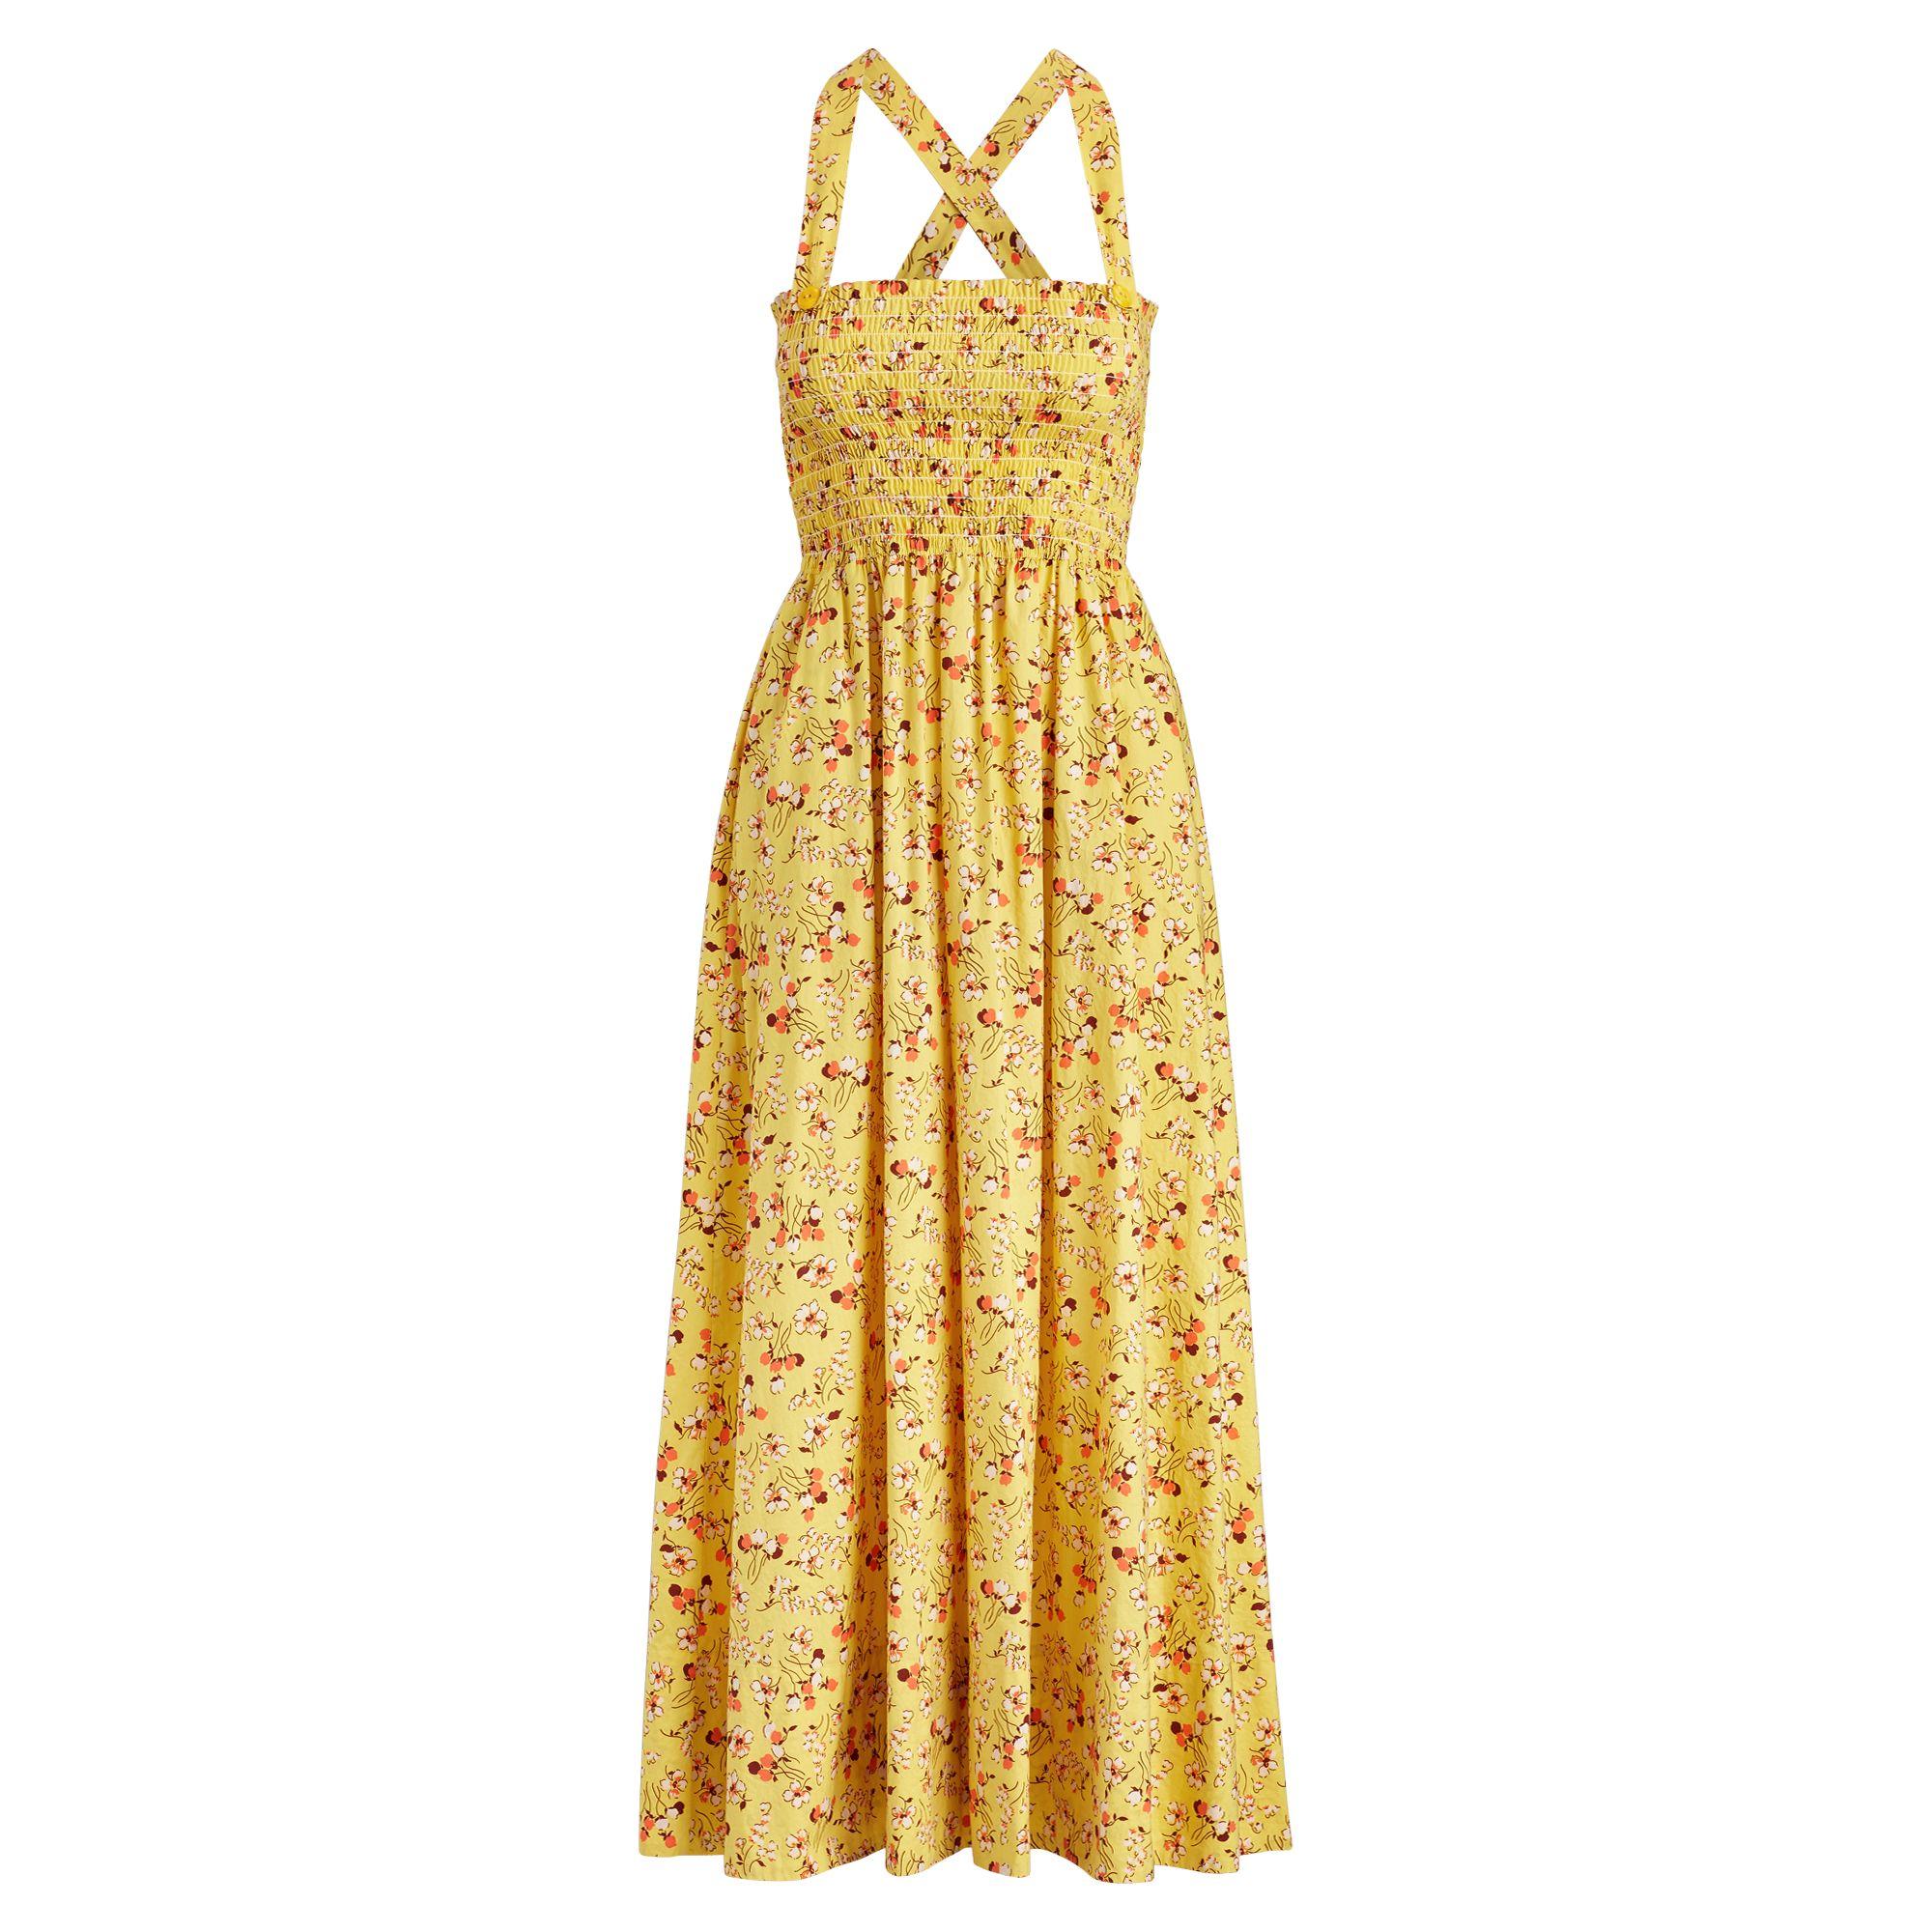 Polo Ralph Lauren Floral Cotton Midi Dress in Yellow - Save 30% - Lyst